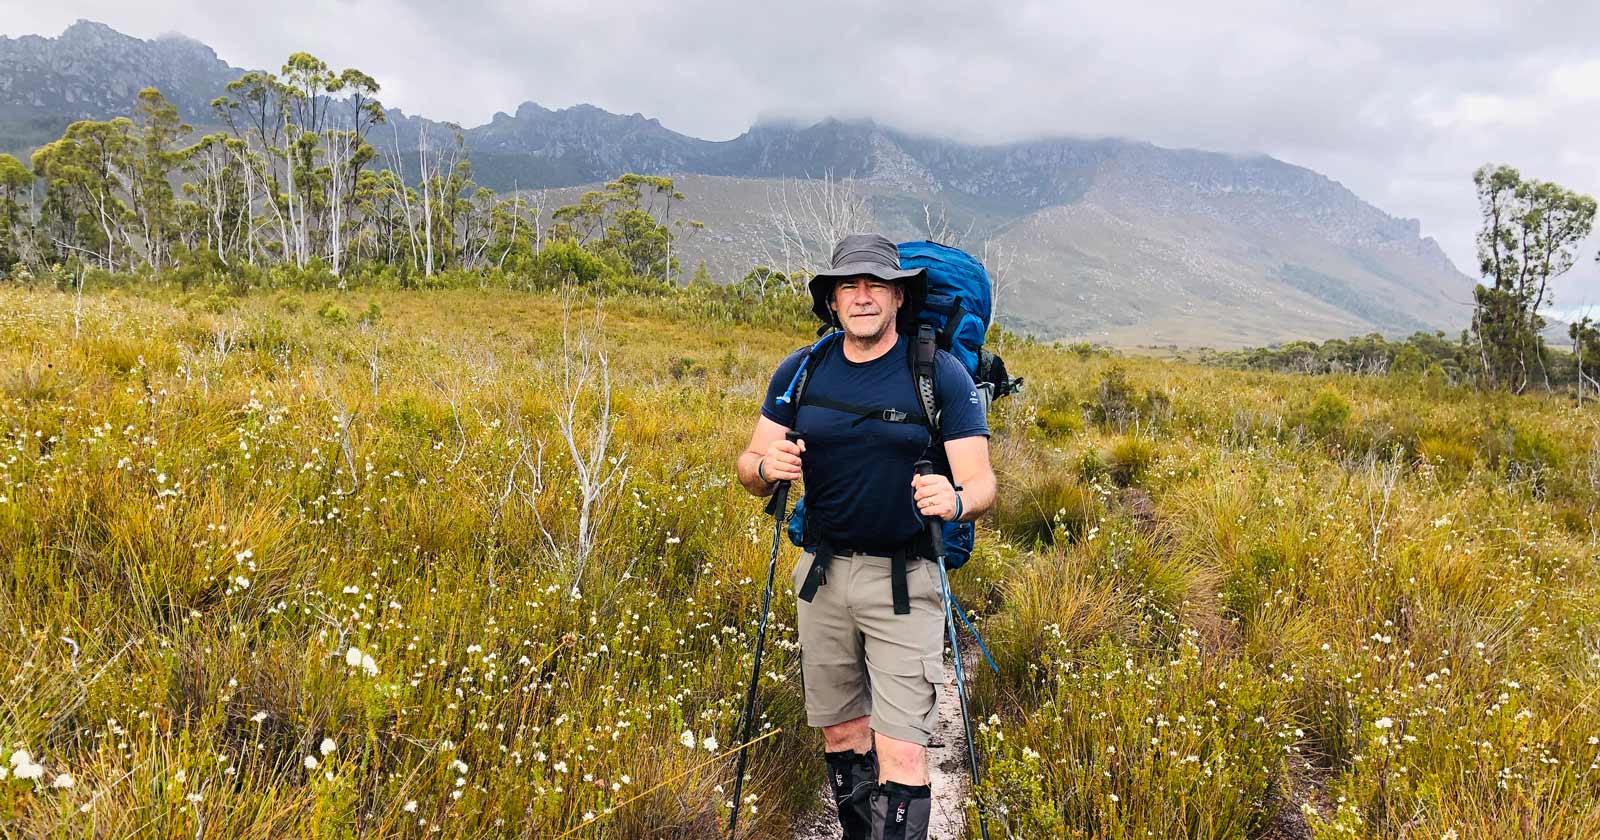 What kind of hat should you wear hiking?